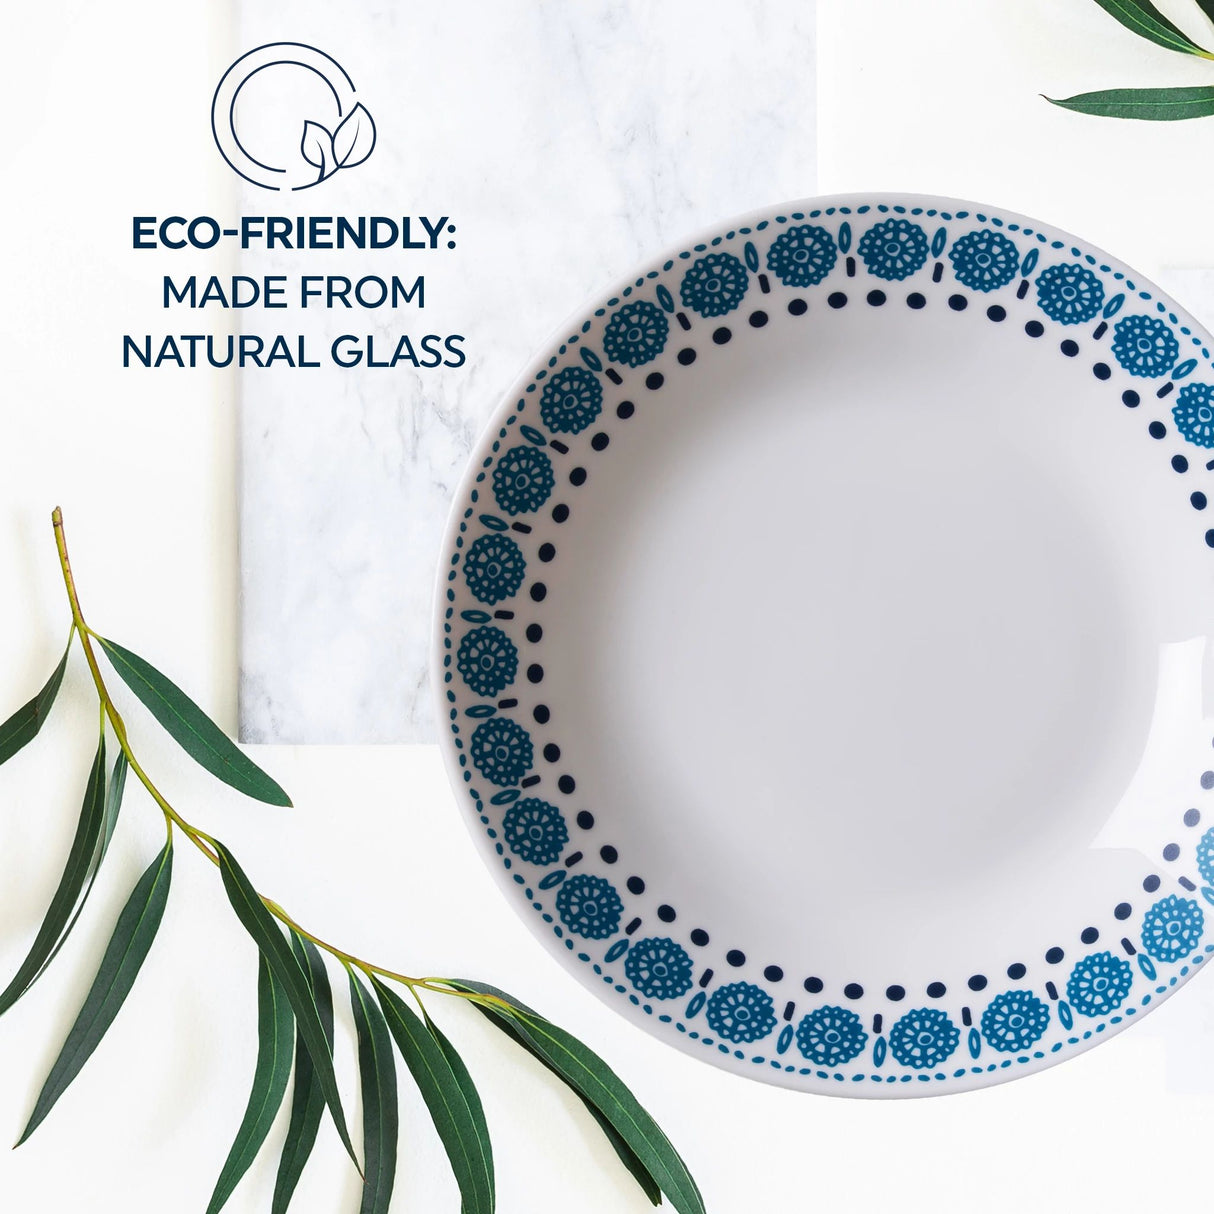  Azure Medallion 30-ounce Meal Bowl with eco friendly made from natural glass text 